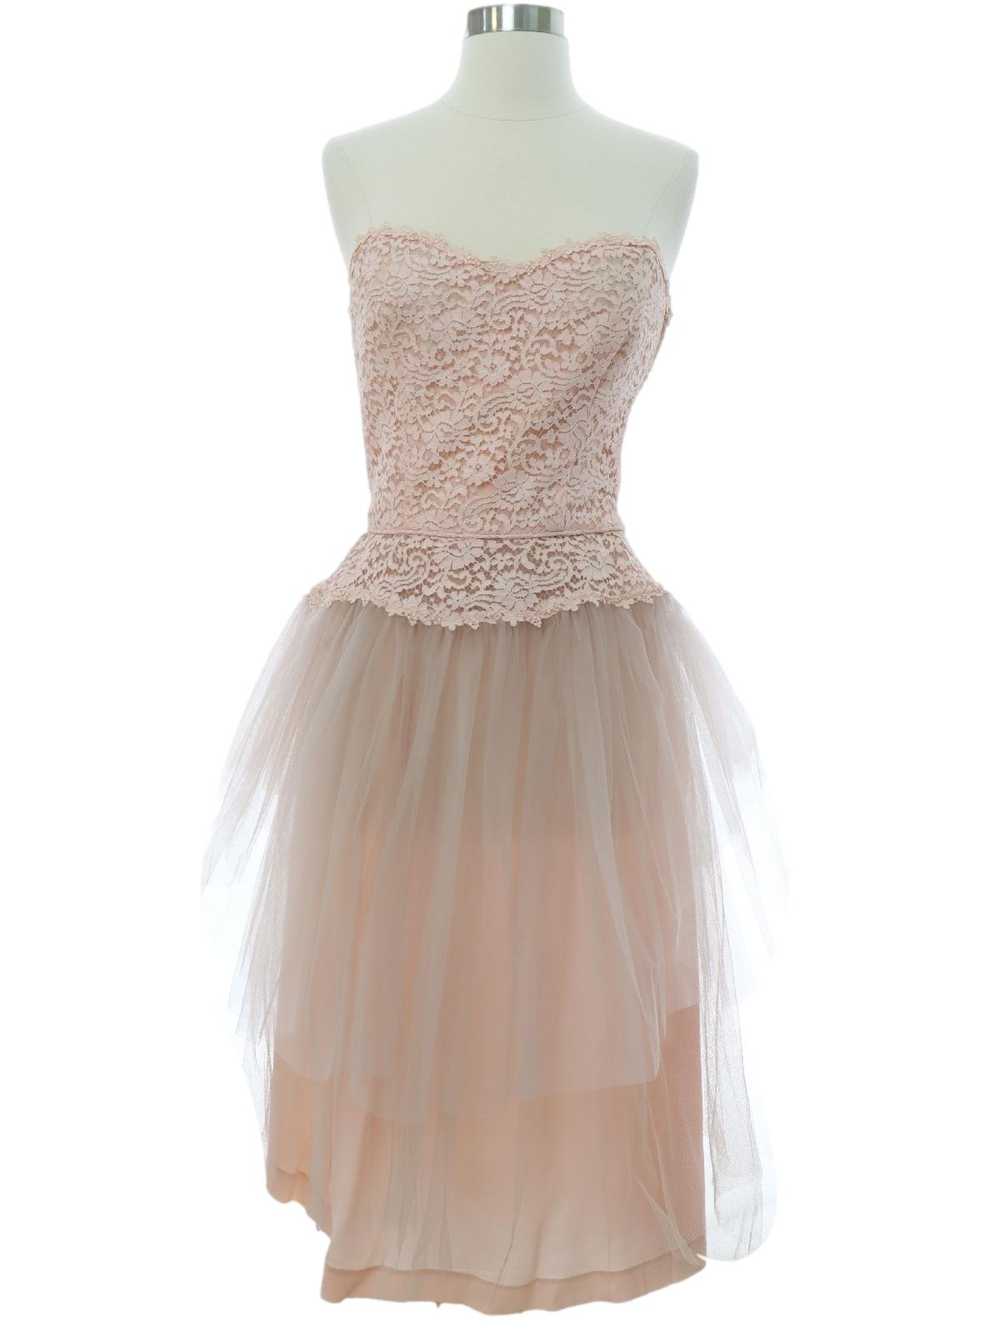 1960's Cocktail or Prom Dress - image 1